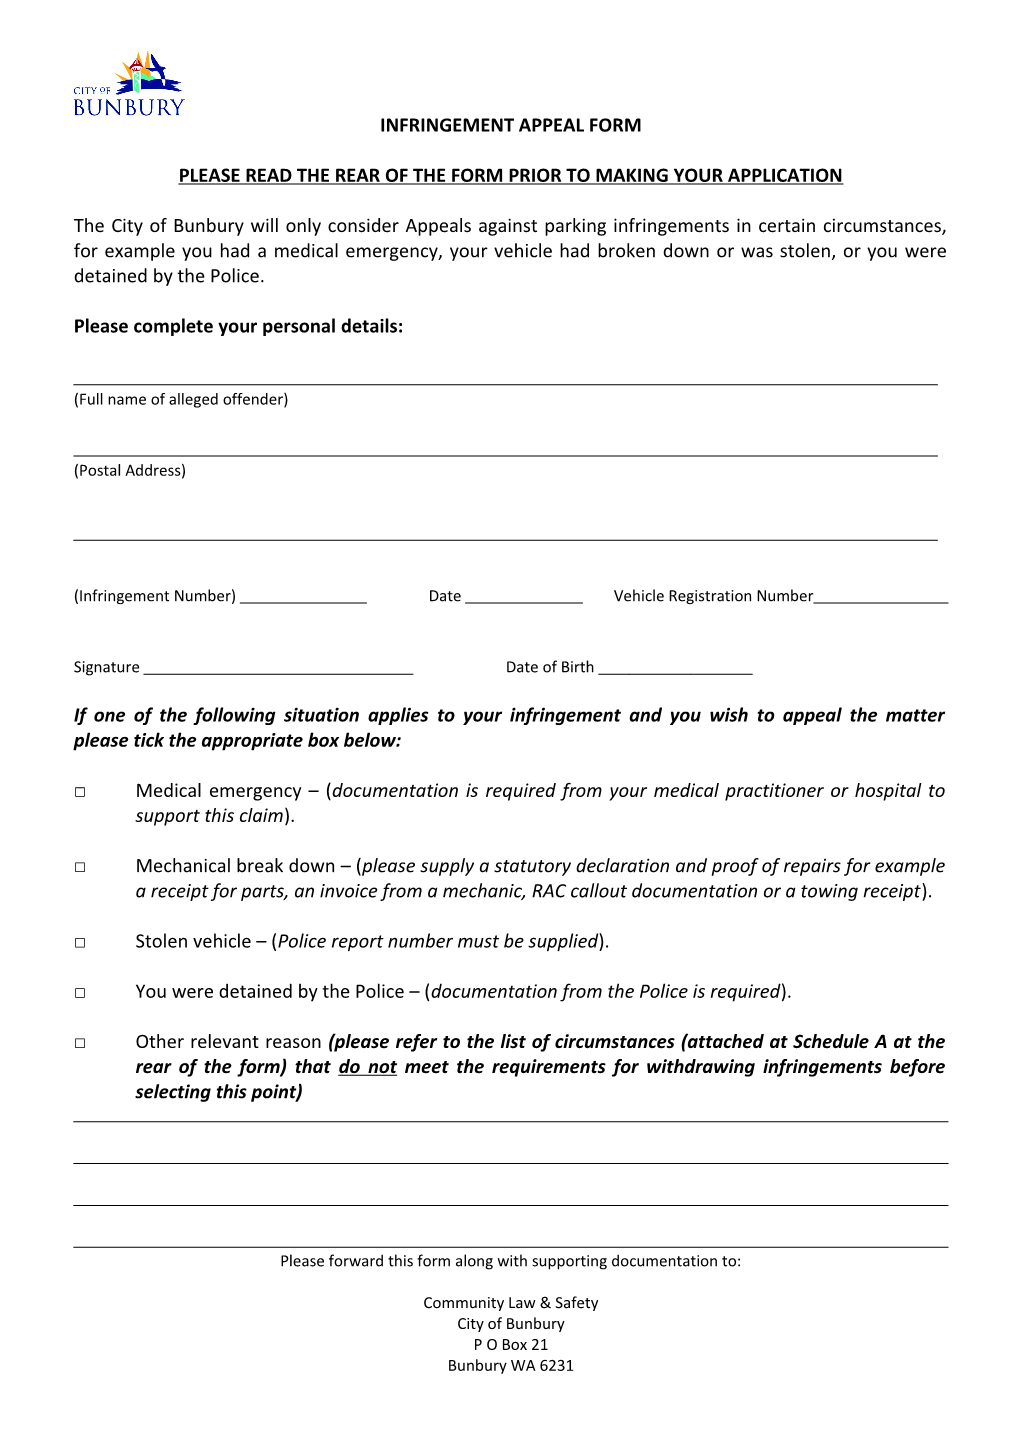 Please Read the Rear of the Form Prior to Making Your Application